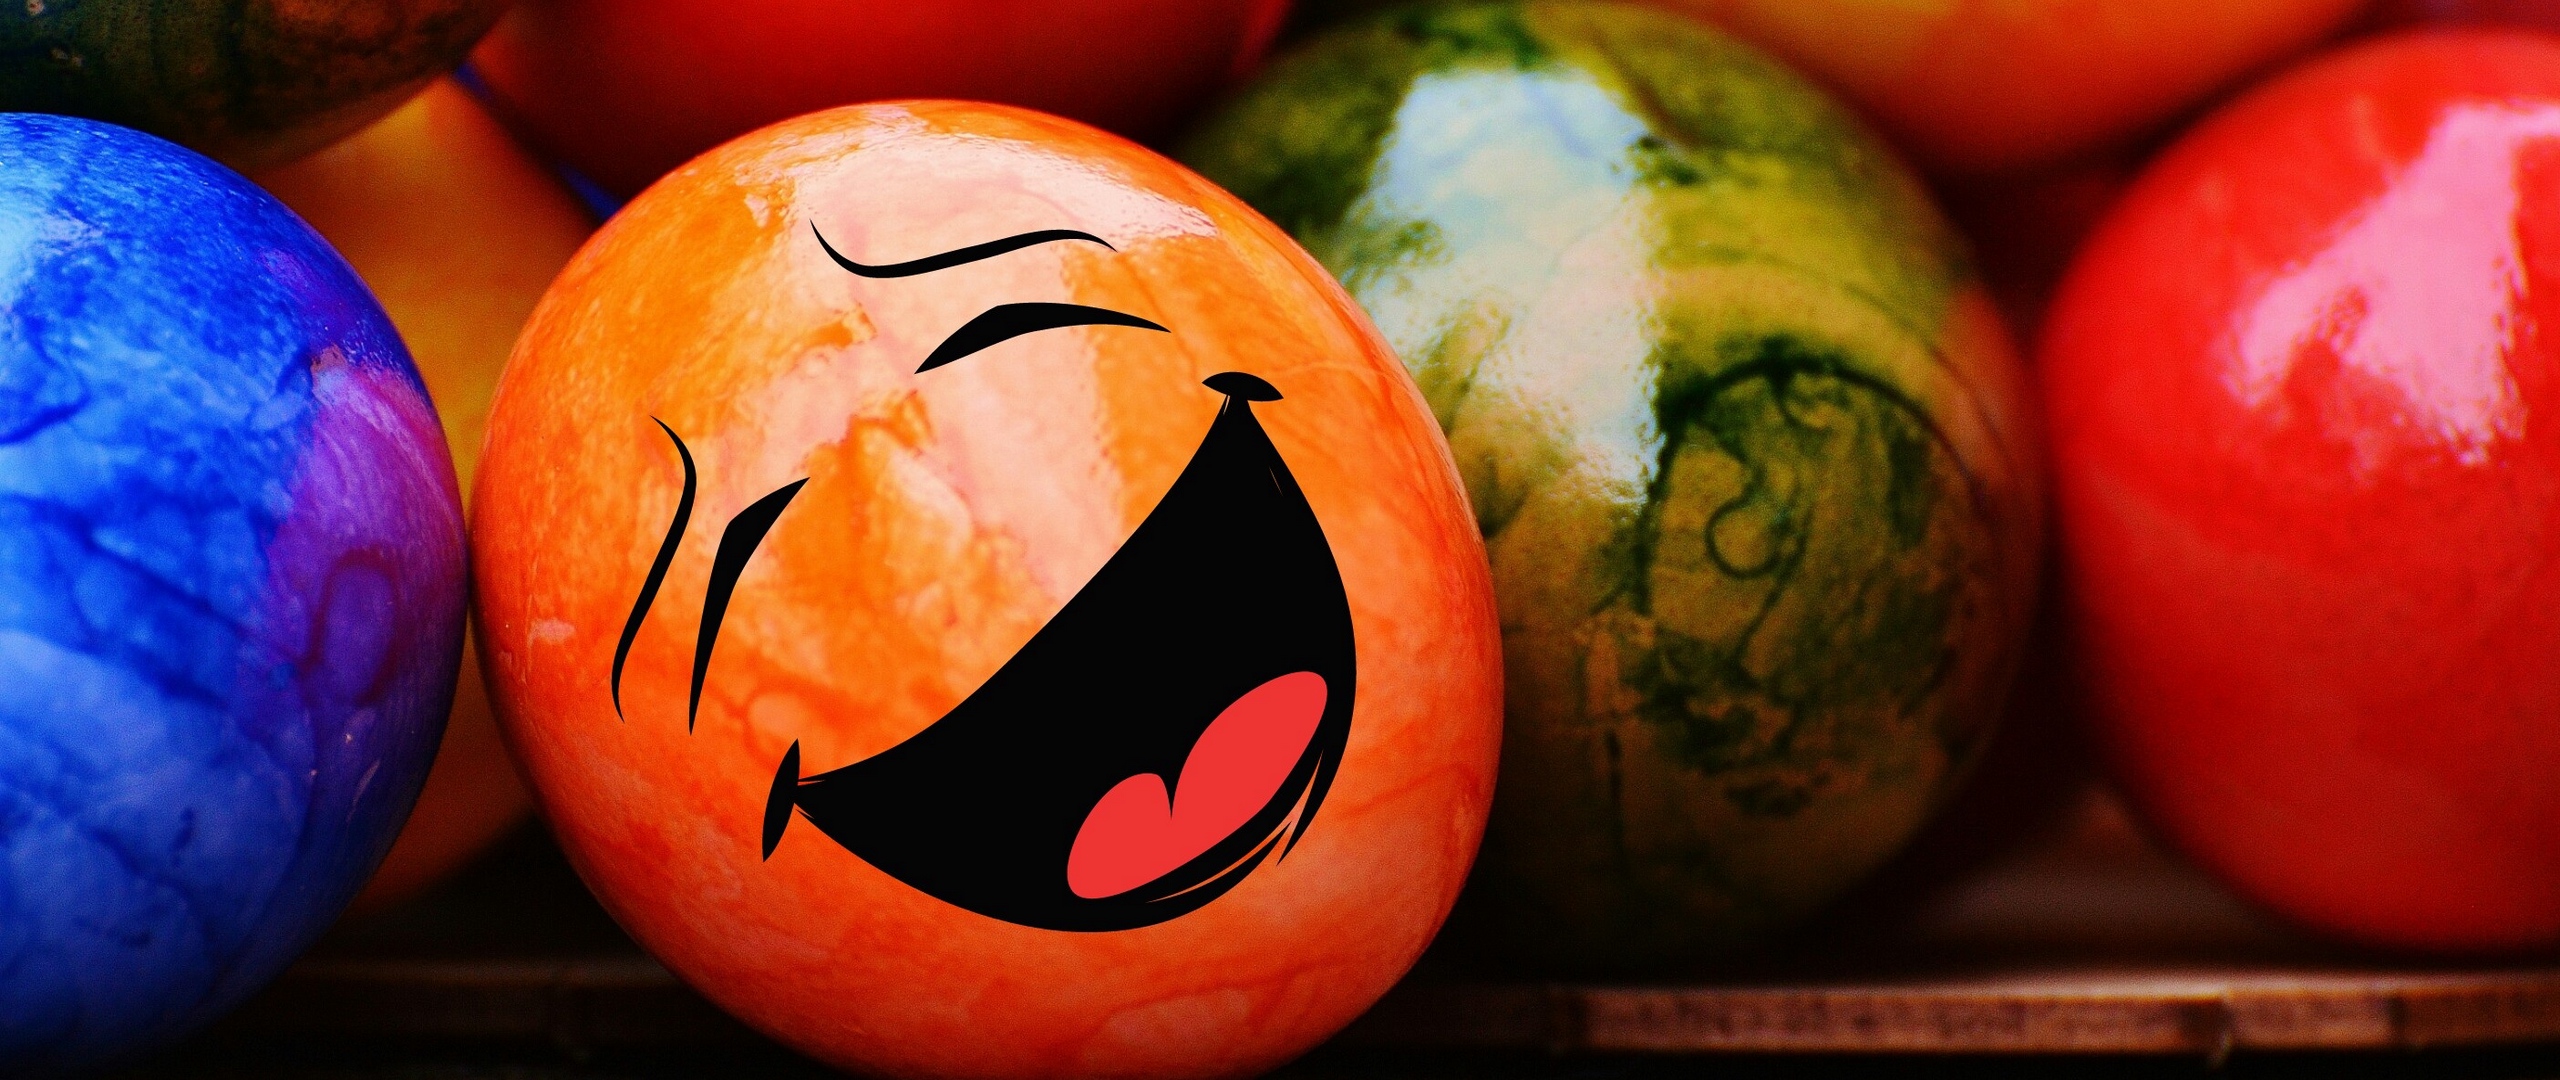 Wallpaper Easter, Easter Eggs, Emoticon - Extreme Easter - HD Wallpaper 